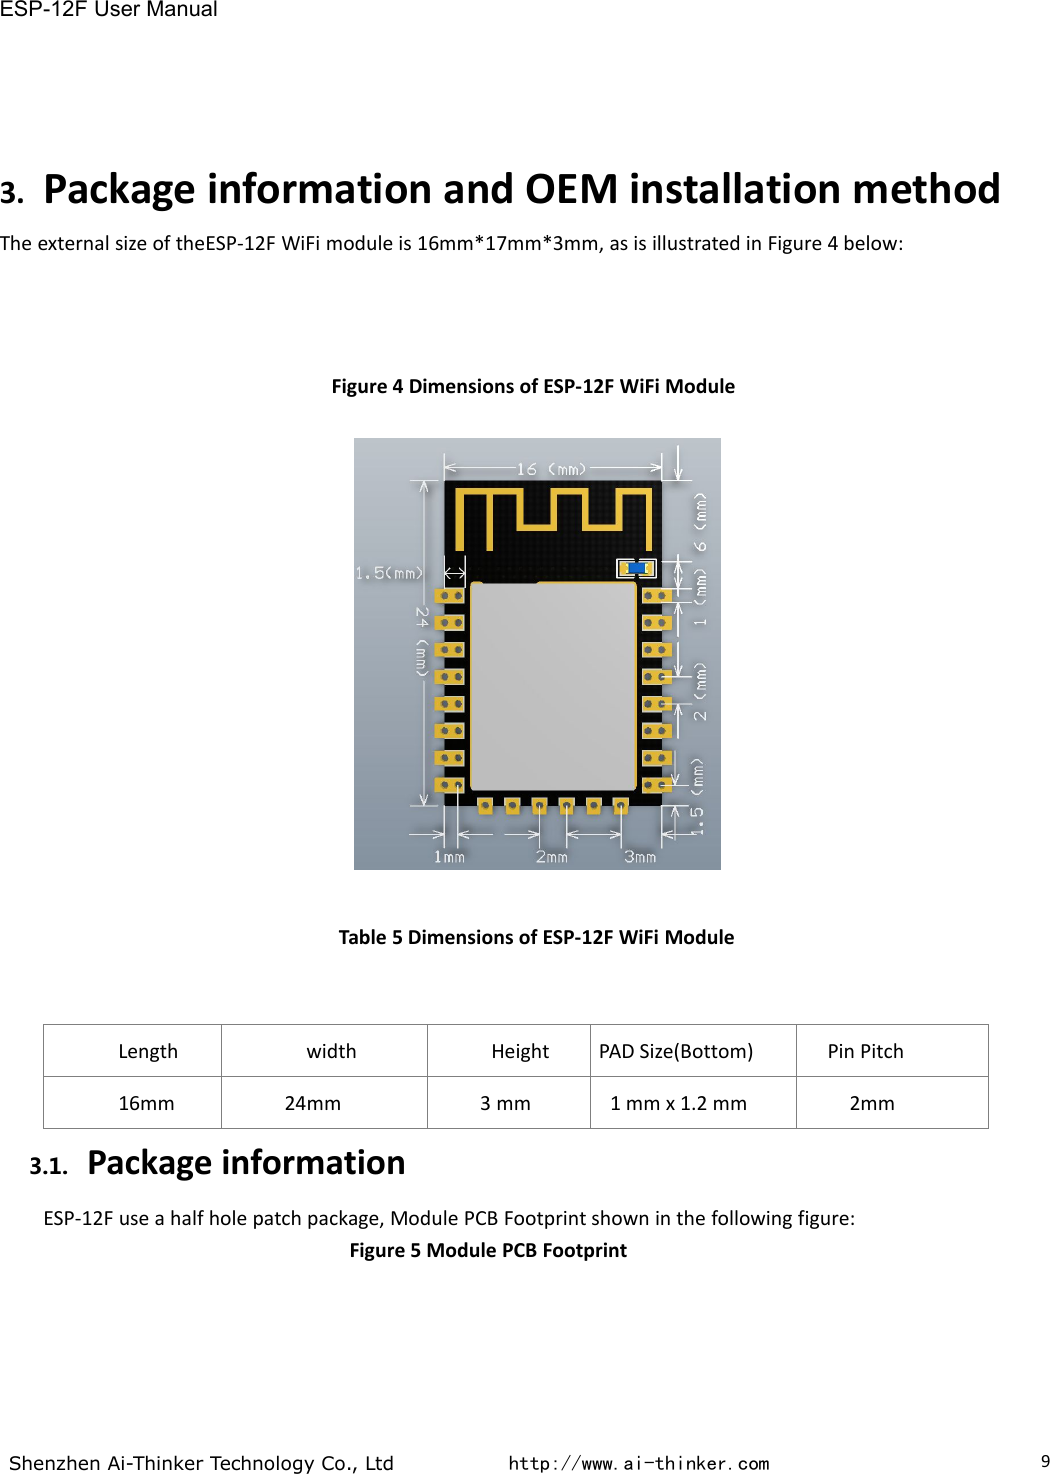 ESP-12F User ManualShenzhen Ai-Thinker Technology Co., Ltd http://www.ai-thinker.com93. Package information and OEM installation methodThe external size of theESP-12F WiFi module is 16mm*17mm*3mm, as is illustrated in Figure 4 below:Figure 4 Dimensions of ESP-12F WiFi ModuleTable 5 Dimensions of ESP-12F WiFi ModuleLengthwidthHeightPAD Size(Bottom)Pin Pitch16mm24mm3 mm1 mm x 1.2 mm2mm3.1. Package informationESP-12F use a half hole patch package, Module PCB Footprint shown in the following figure:Figure 5 Module PCB Footprint